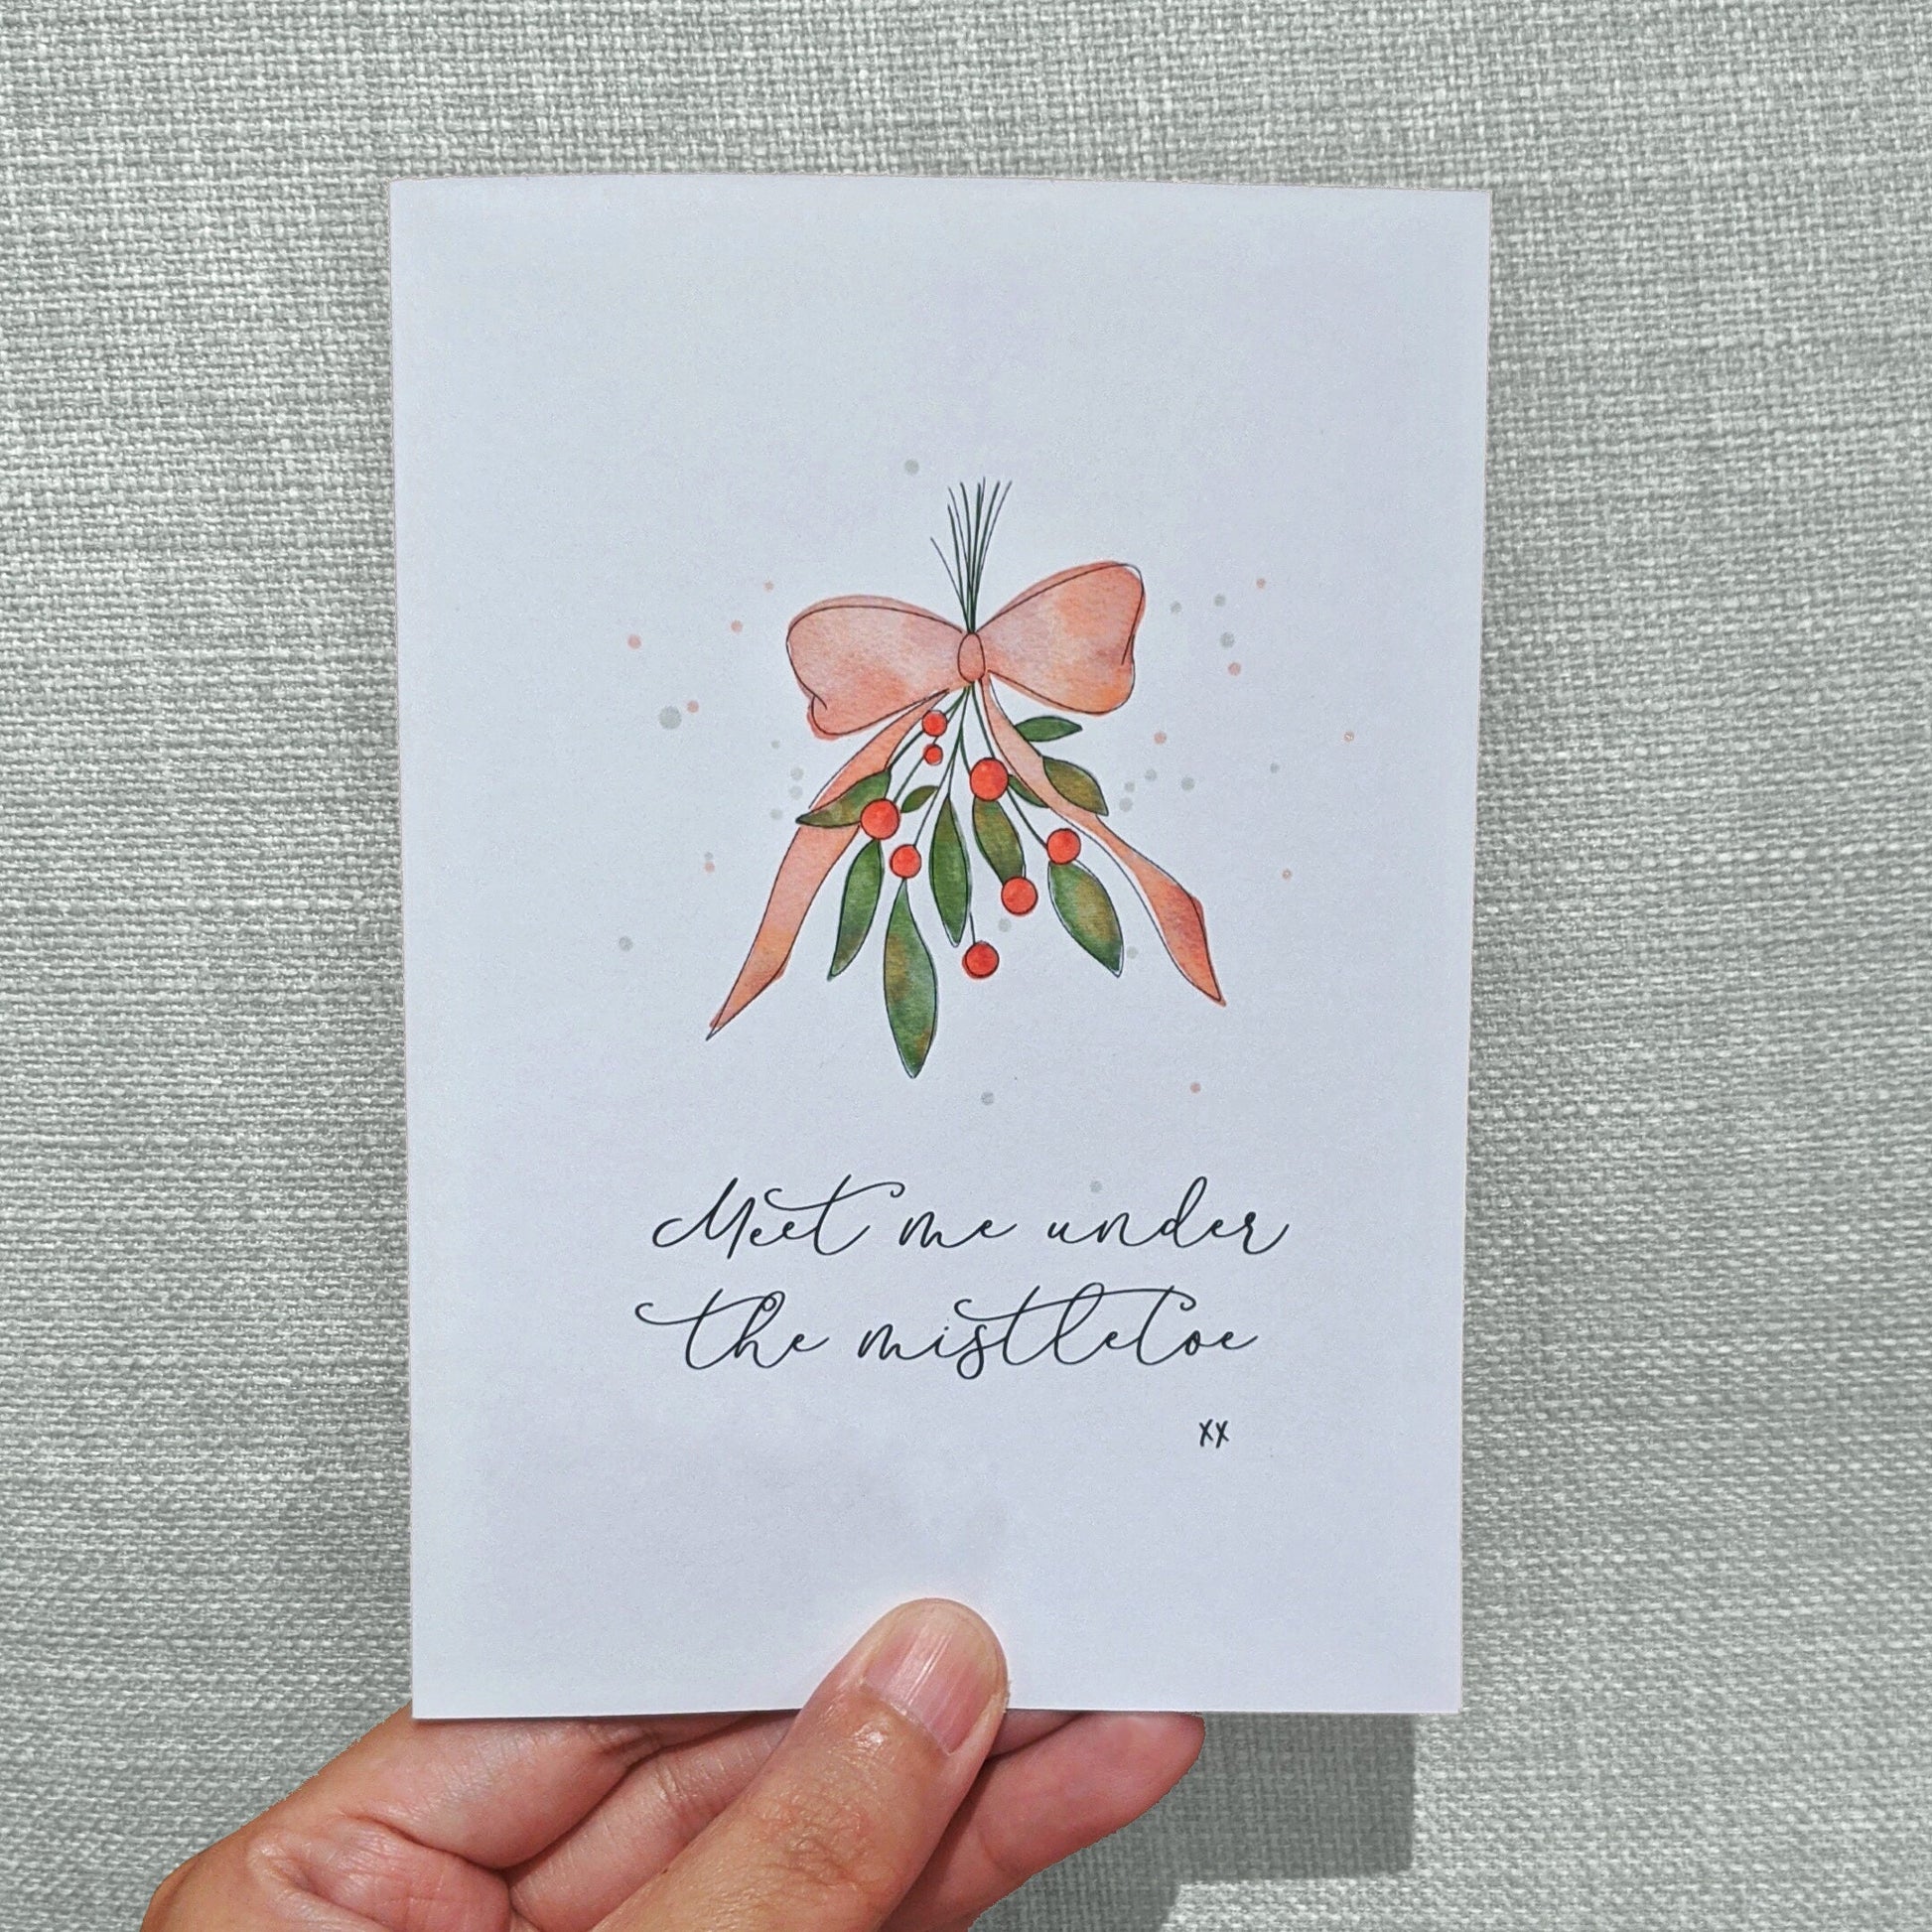 Greeting card held with hand with lettering "Meet me under the mistletoe xx" with watercolour illustration of mistletoe tied with red ribbon